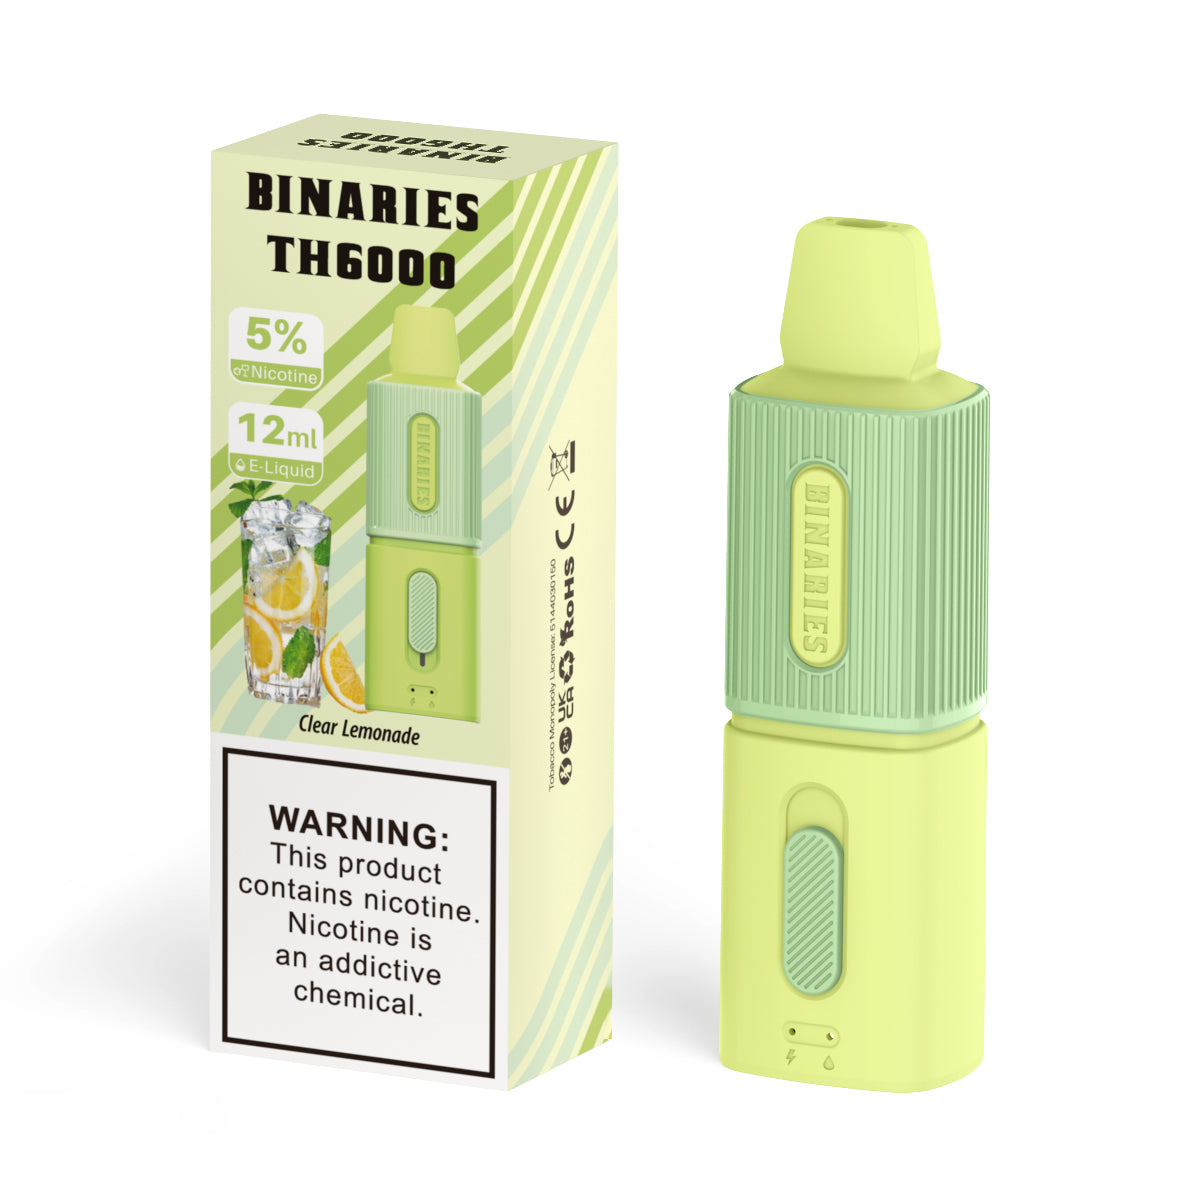 Binaries Cabin Disposable TH | 6000 Puffs | 12mL | 50mg Clear Lemonade with Packaging